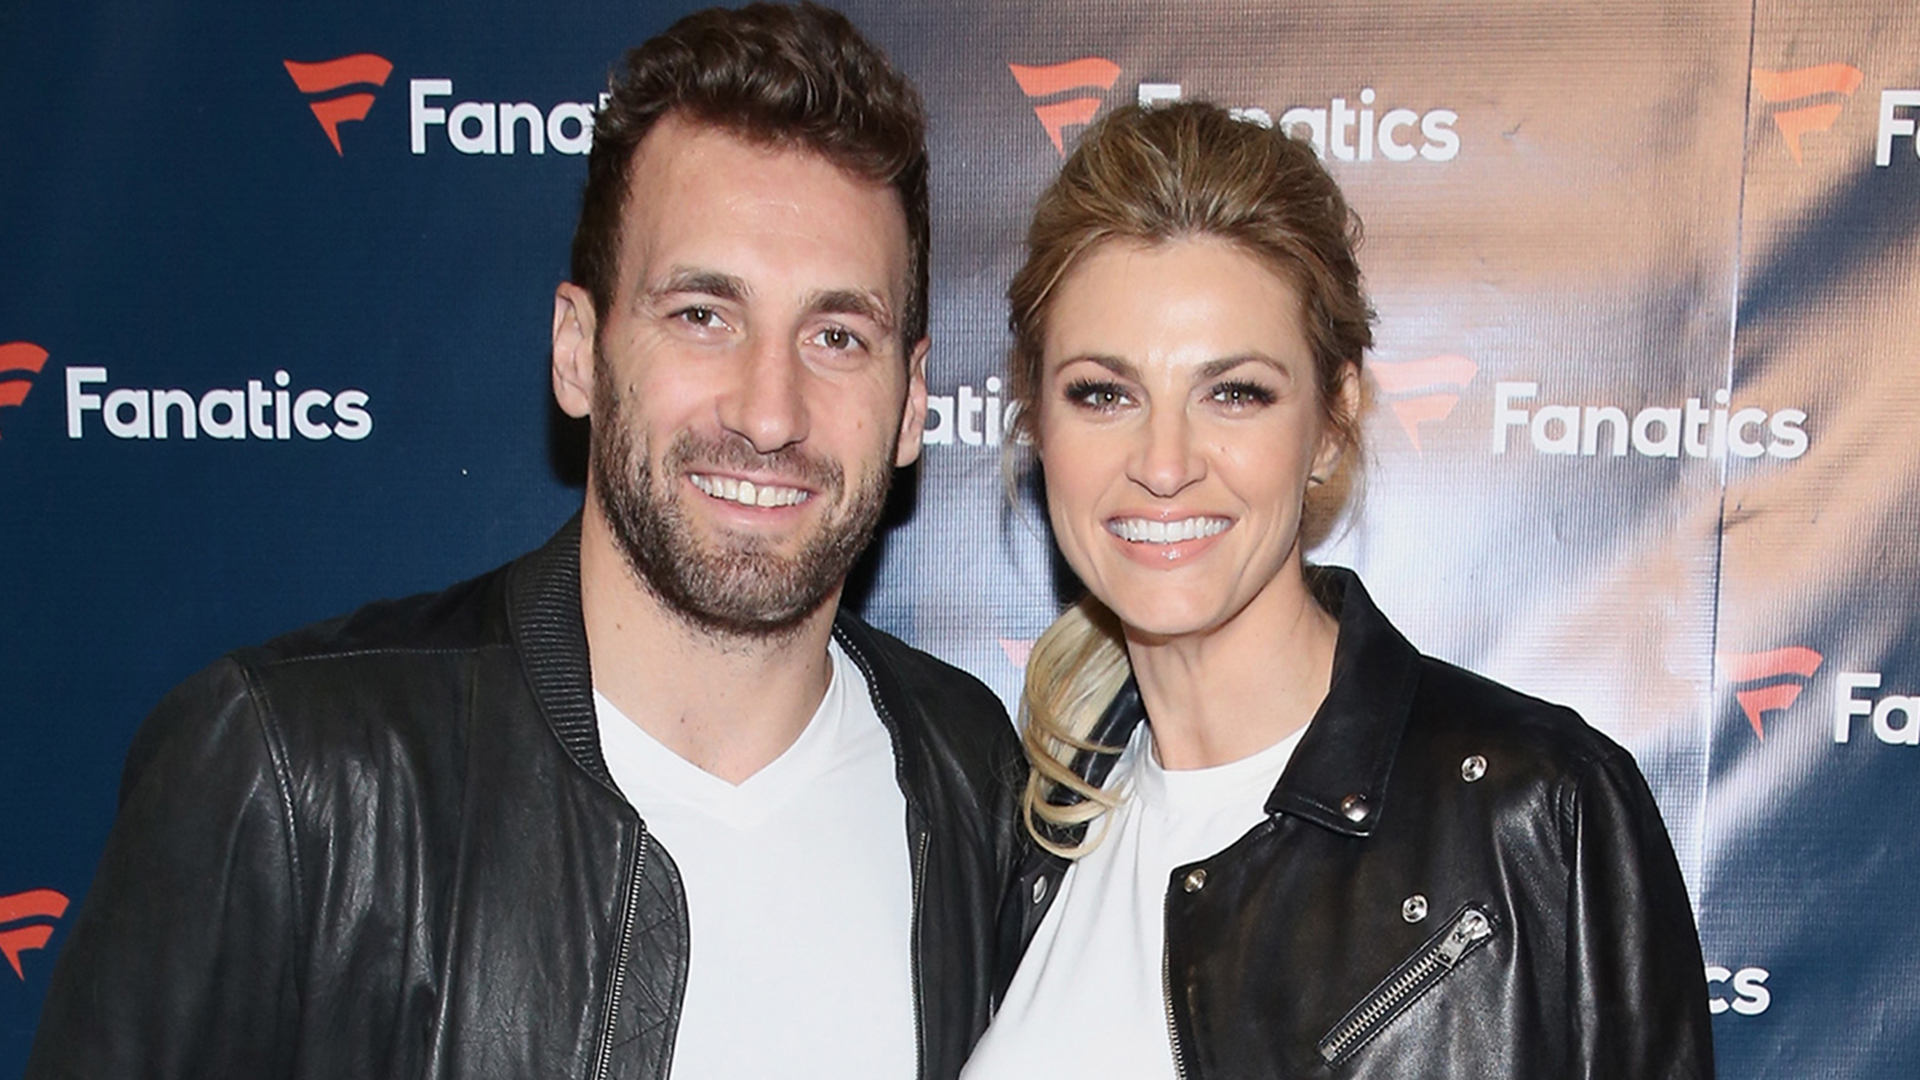 Erin Andrews Welcomes First Baby with Husband Jarret Stoll Via Surrogate